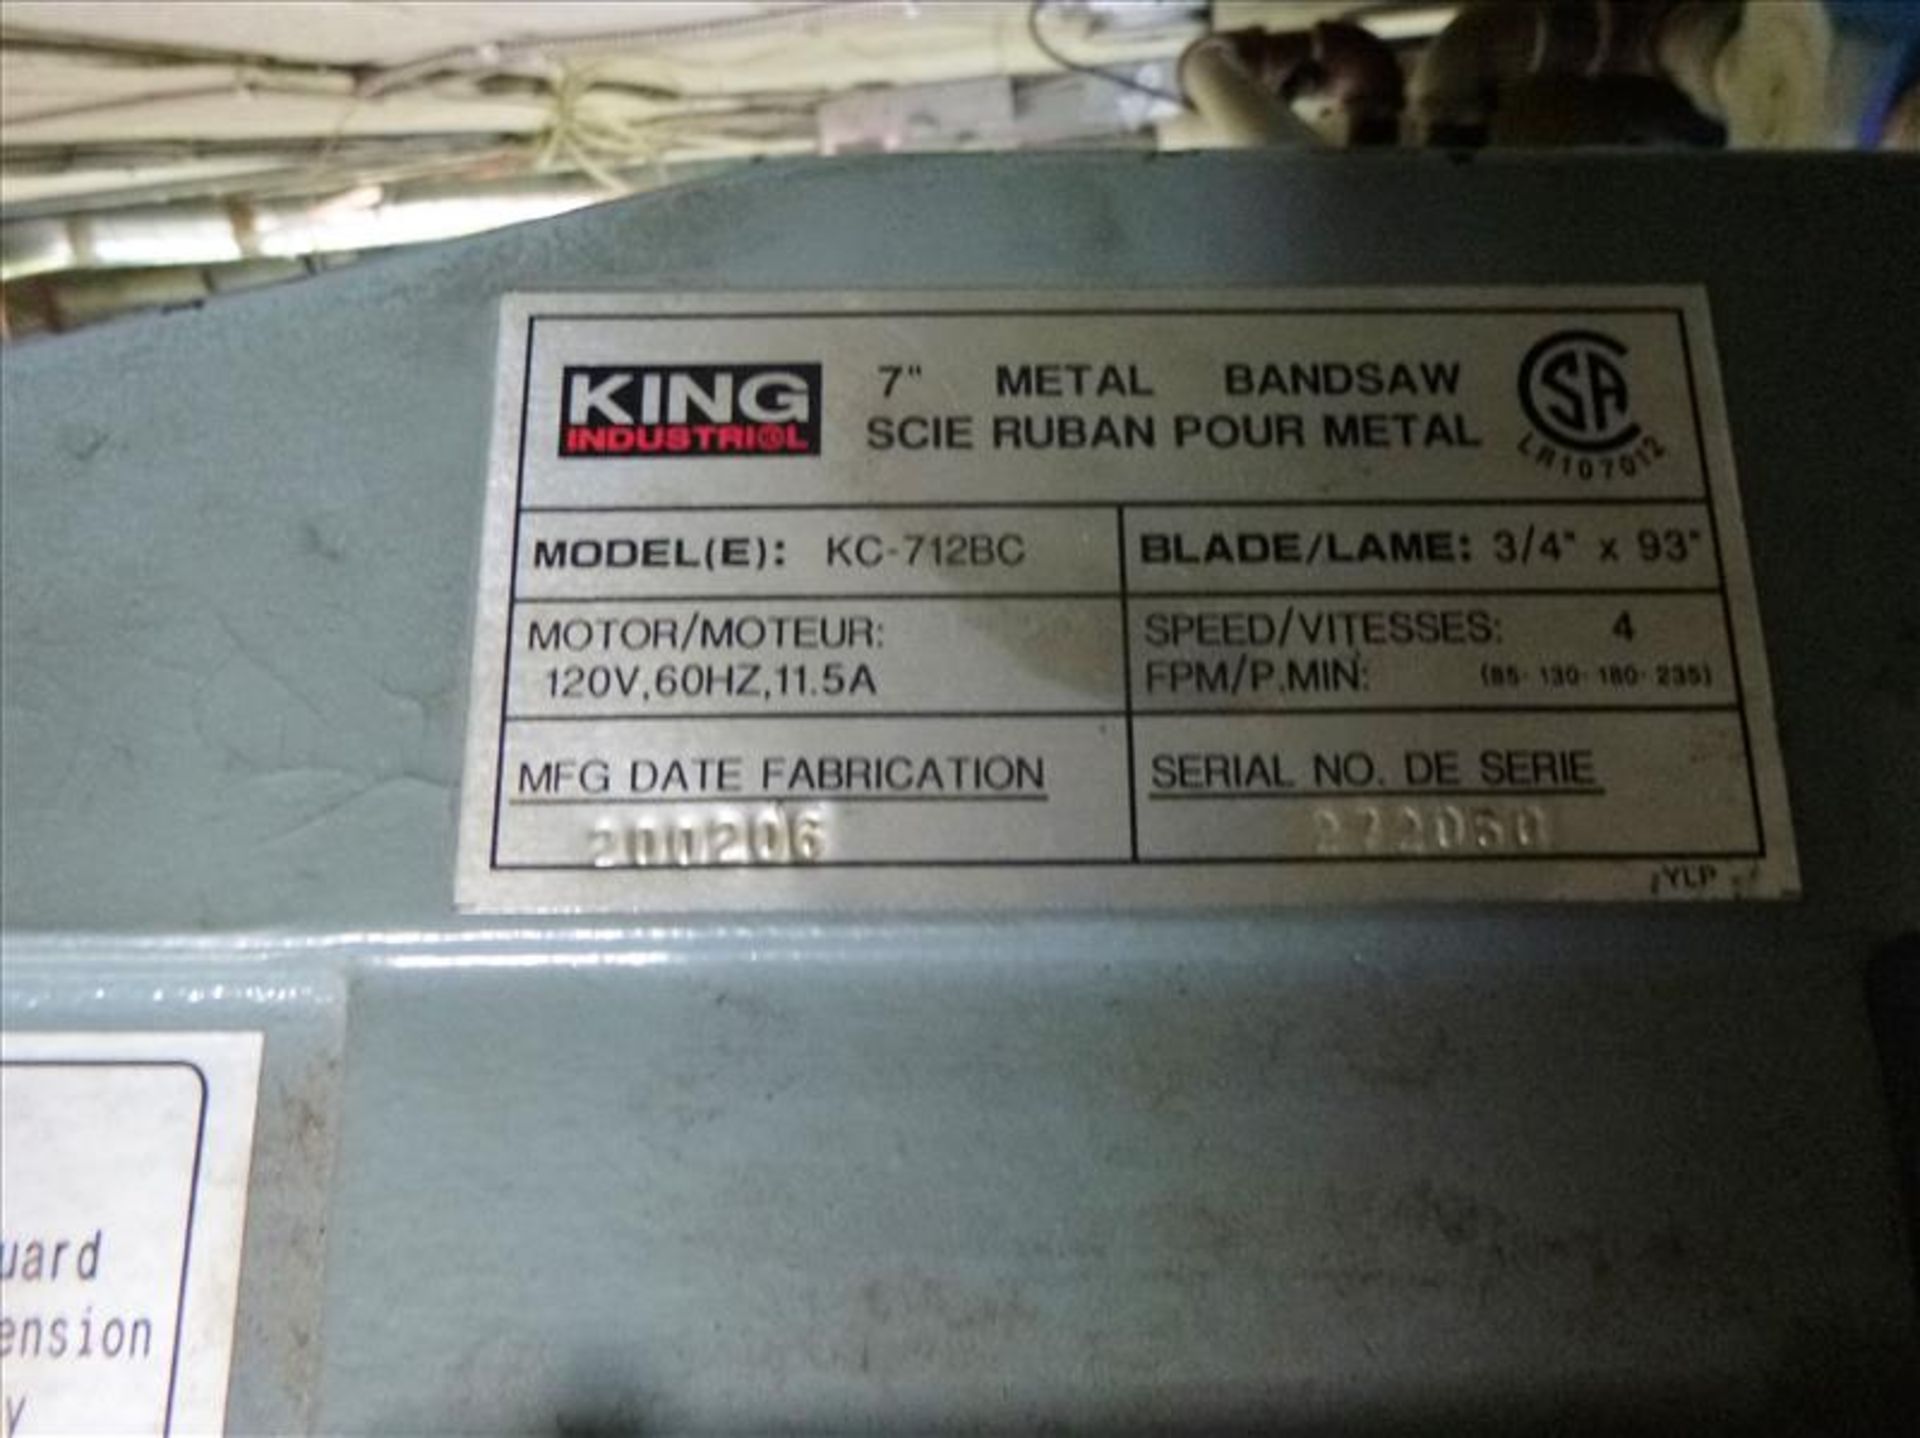 King metal band saw, mod. KC-712BC, ser. no. 272050, 7 in. (2002) (Located in Mississauga, ON) - Bild 2 aus 2